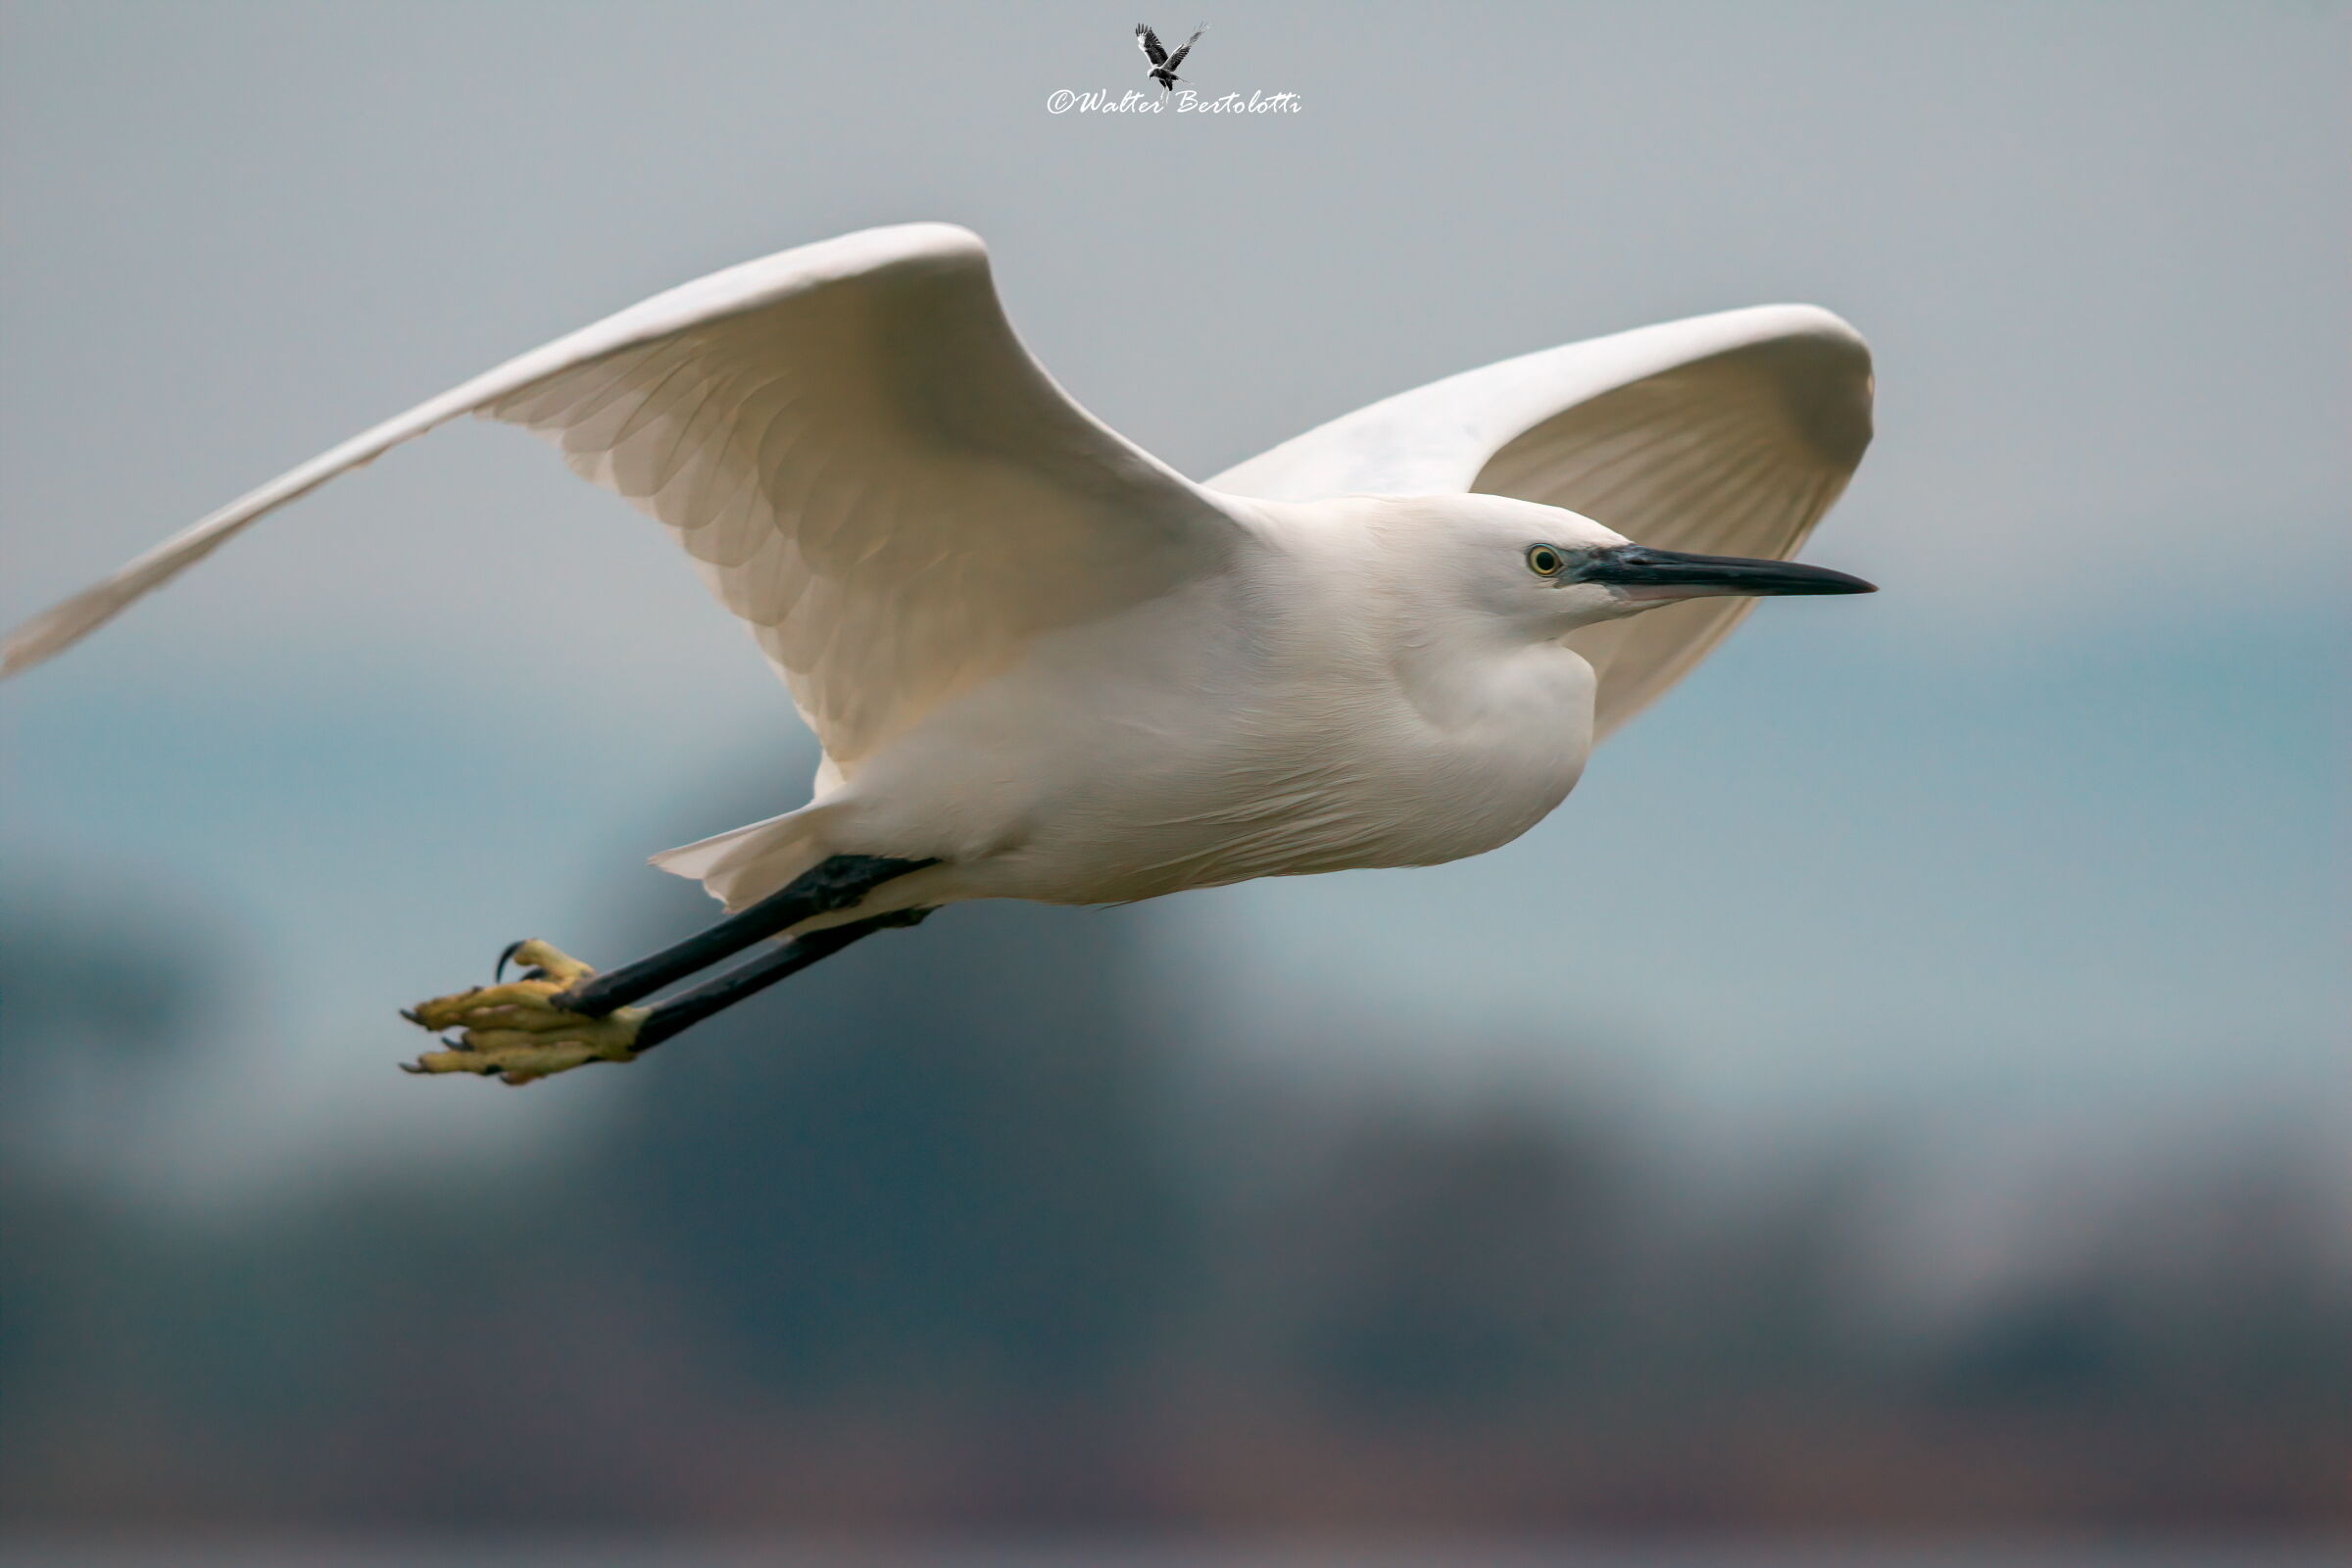 the flight of the egret...